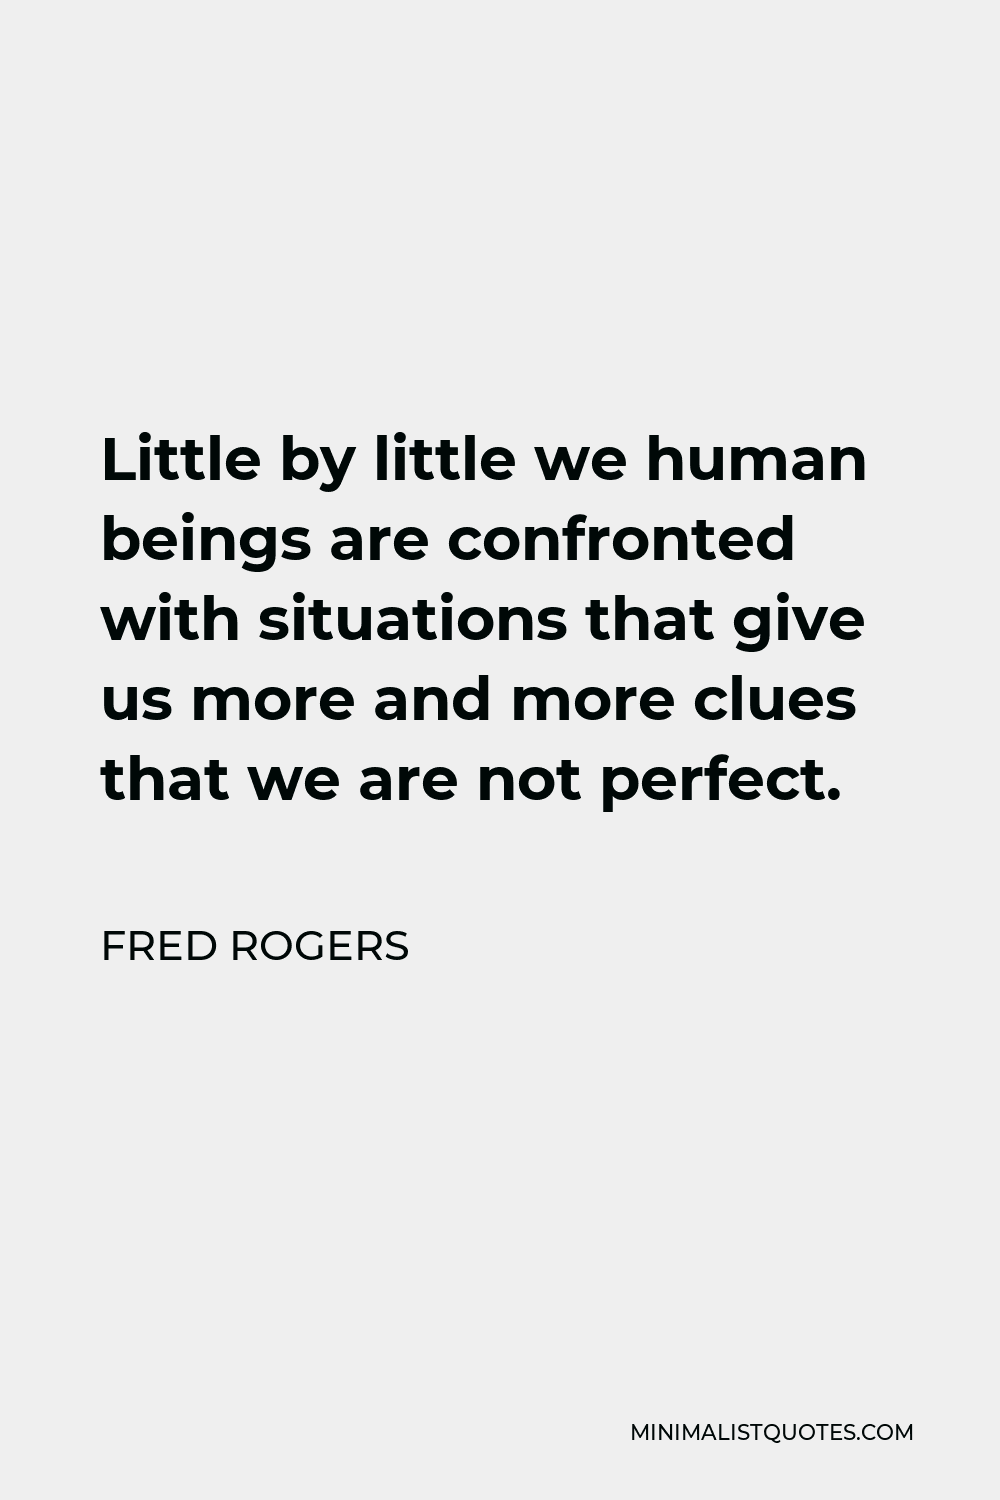 Fred Rogers Quote - Little by little we human beings are confronted with situations that give us more and more clues that we are not perfect.